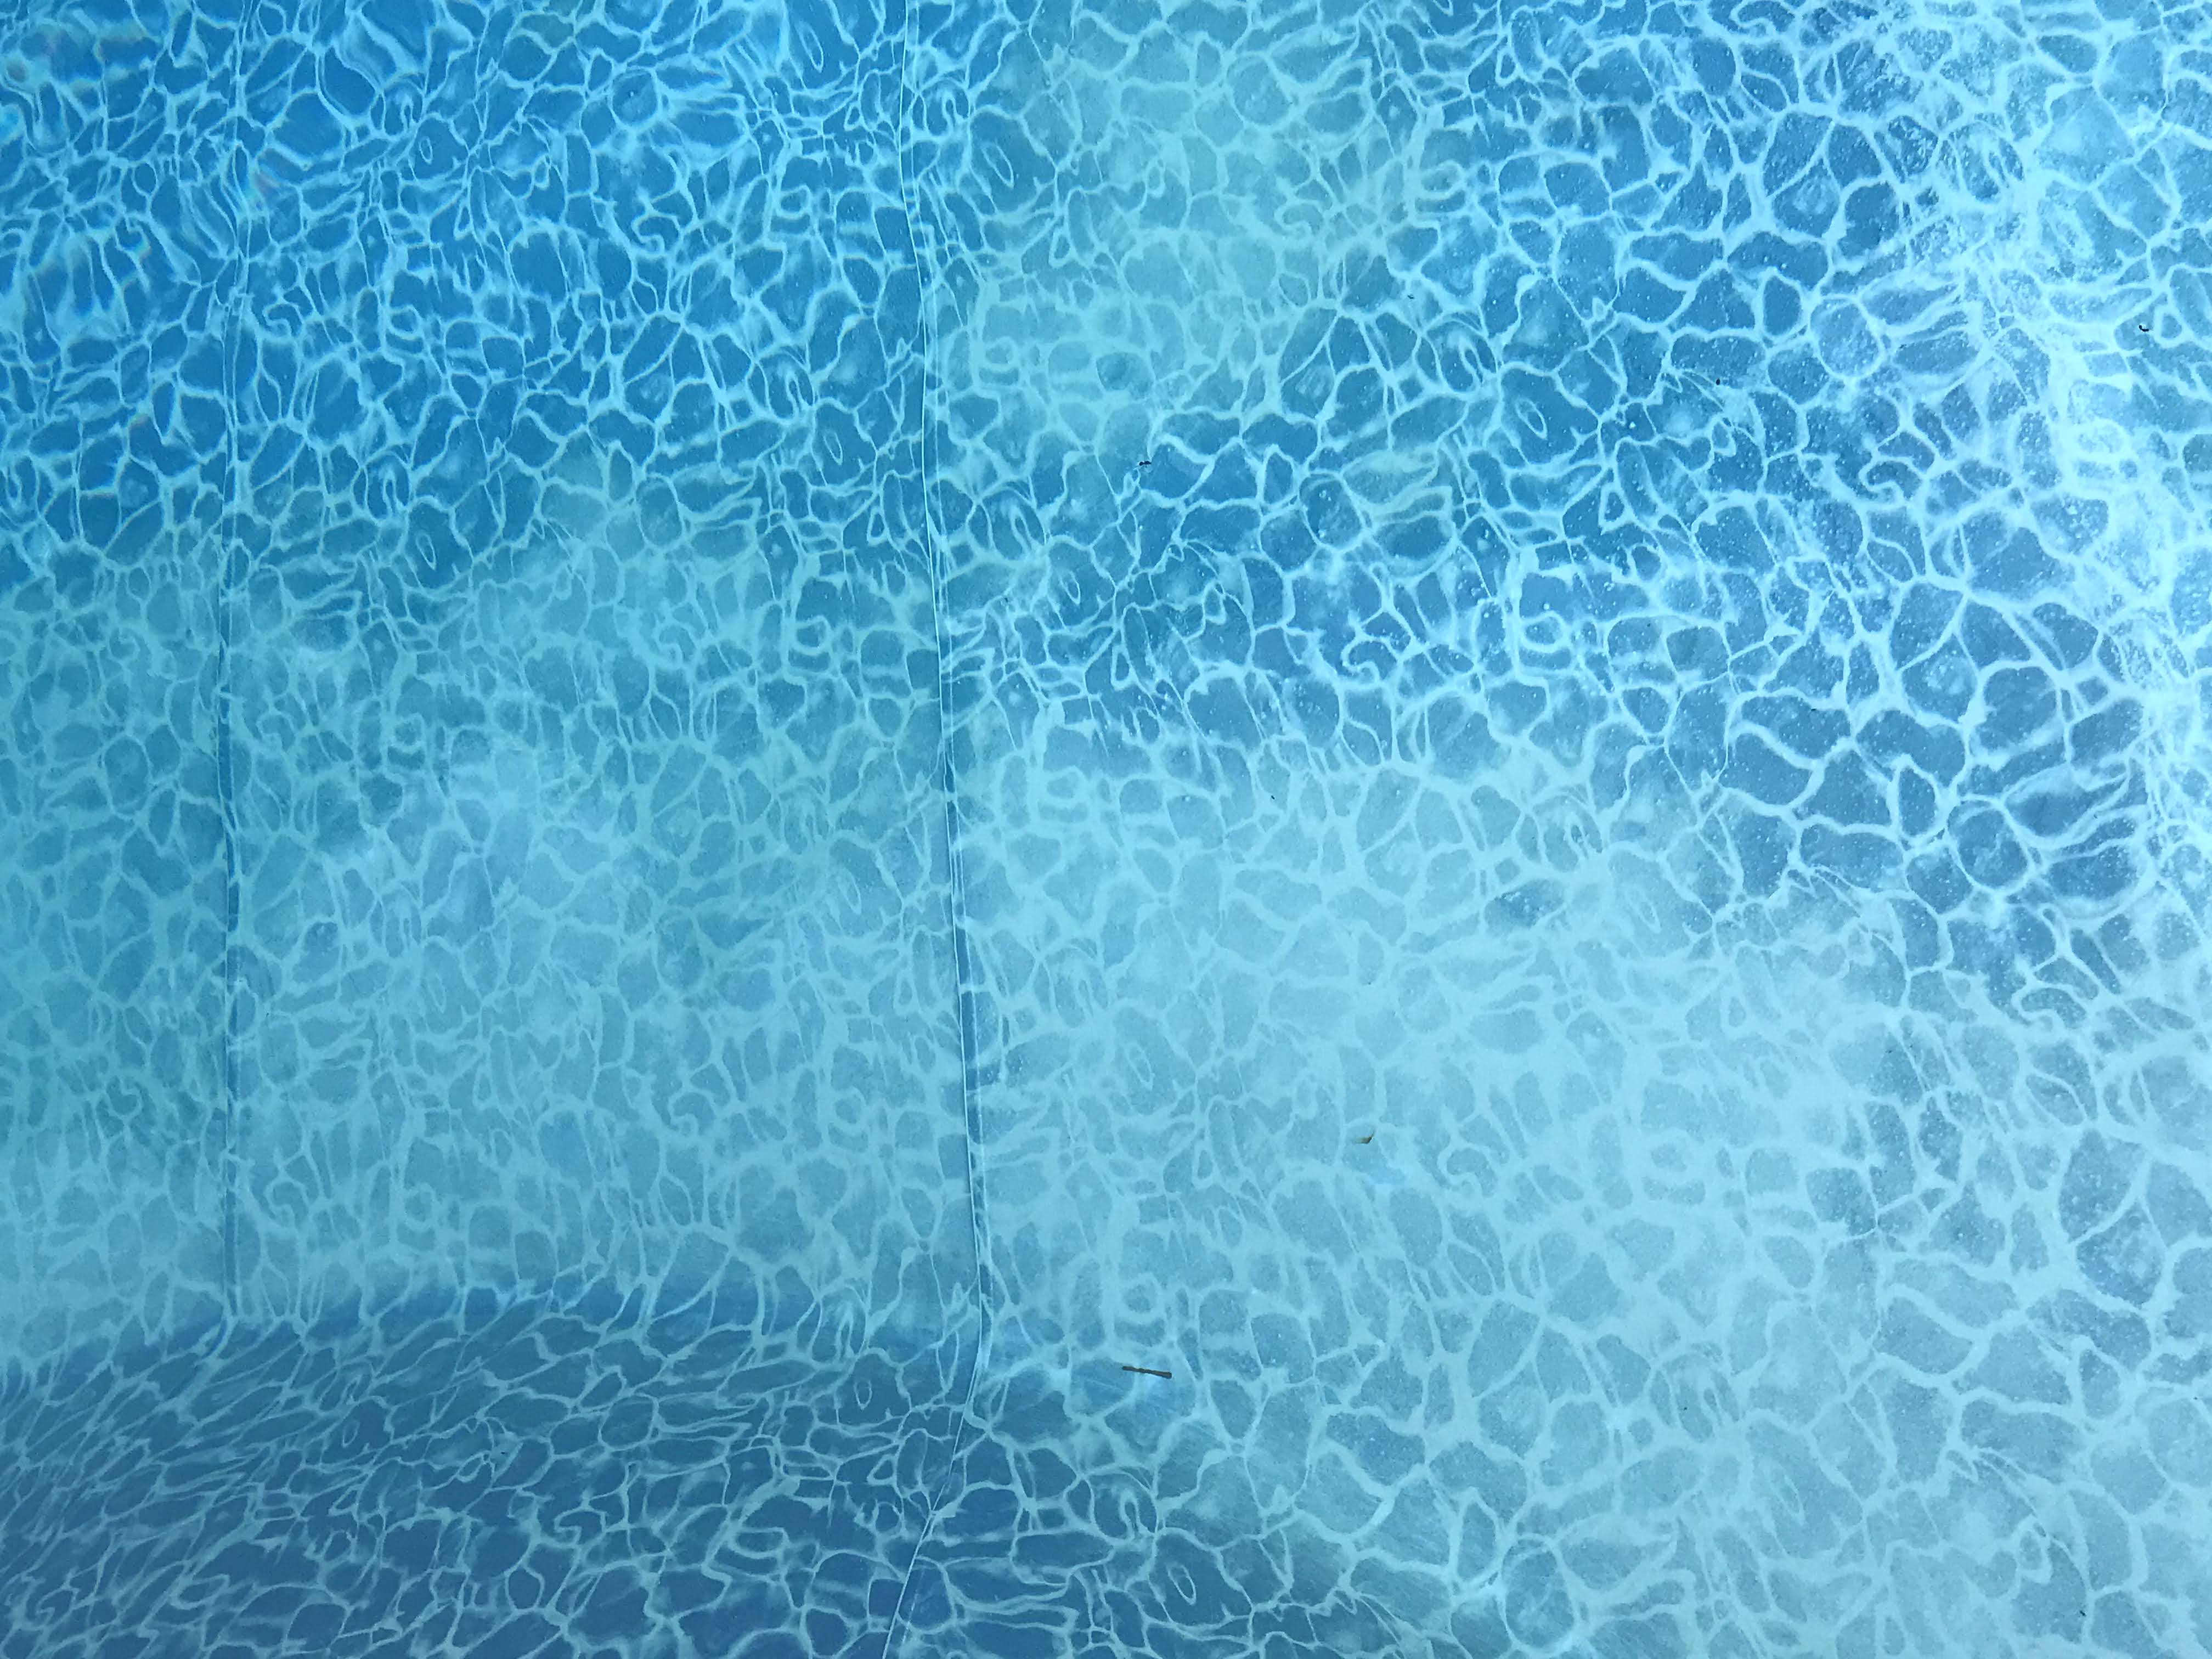 faded pool liner